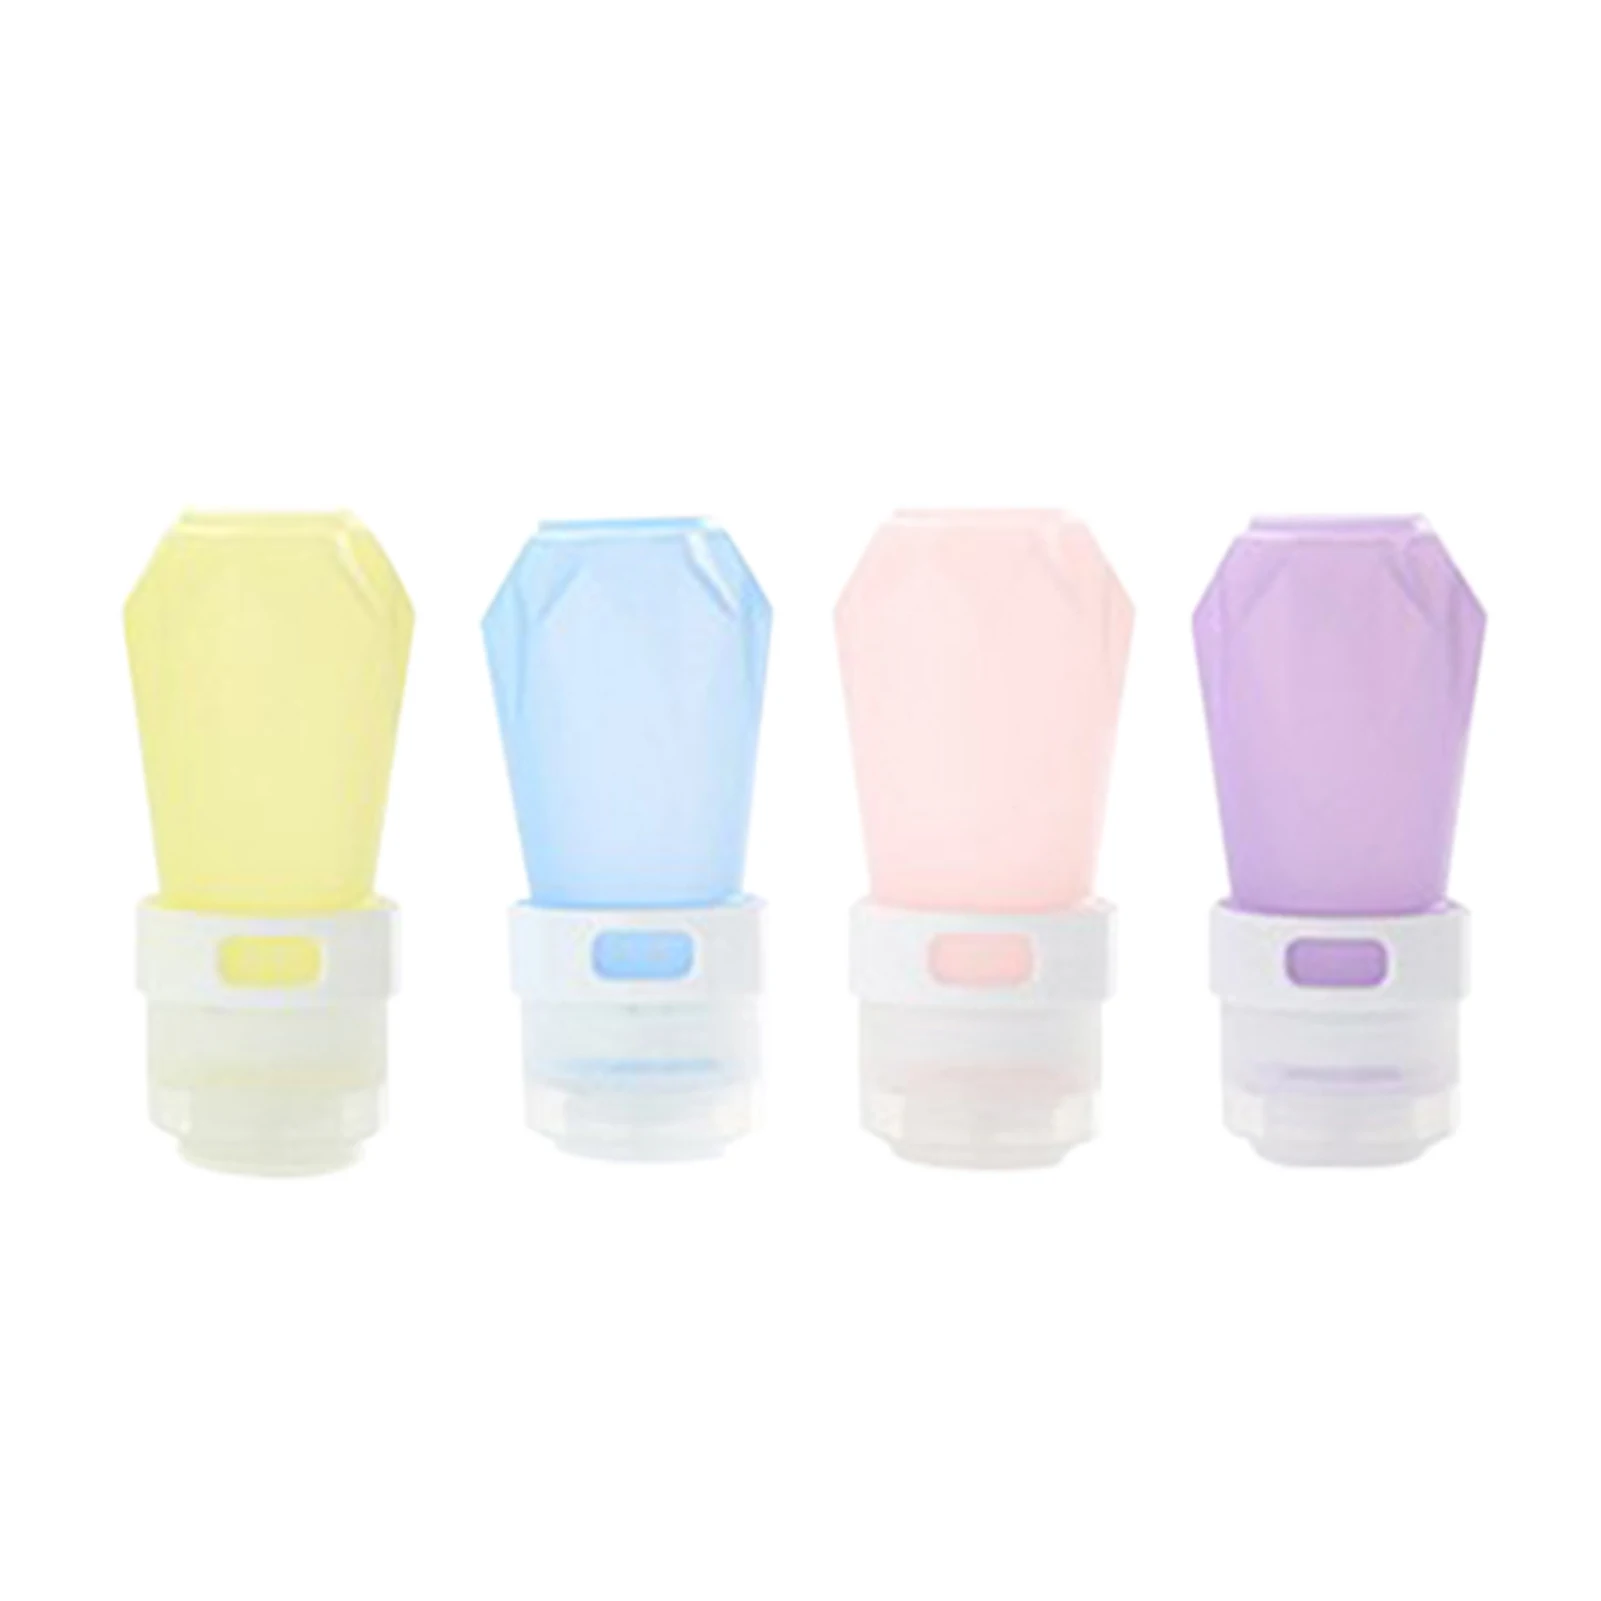 

4pcs Silicone Travel Bottles 40ml, 60ml, Empty Squeeze Travel Containers Leakproof Refillable For Shampoo Conditioner Lotion